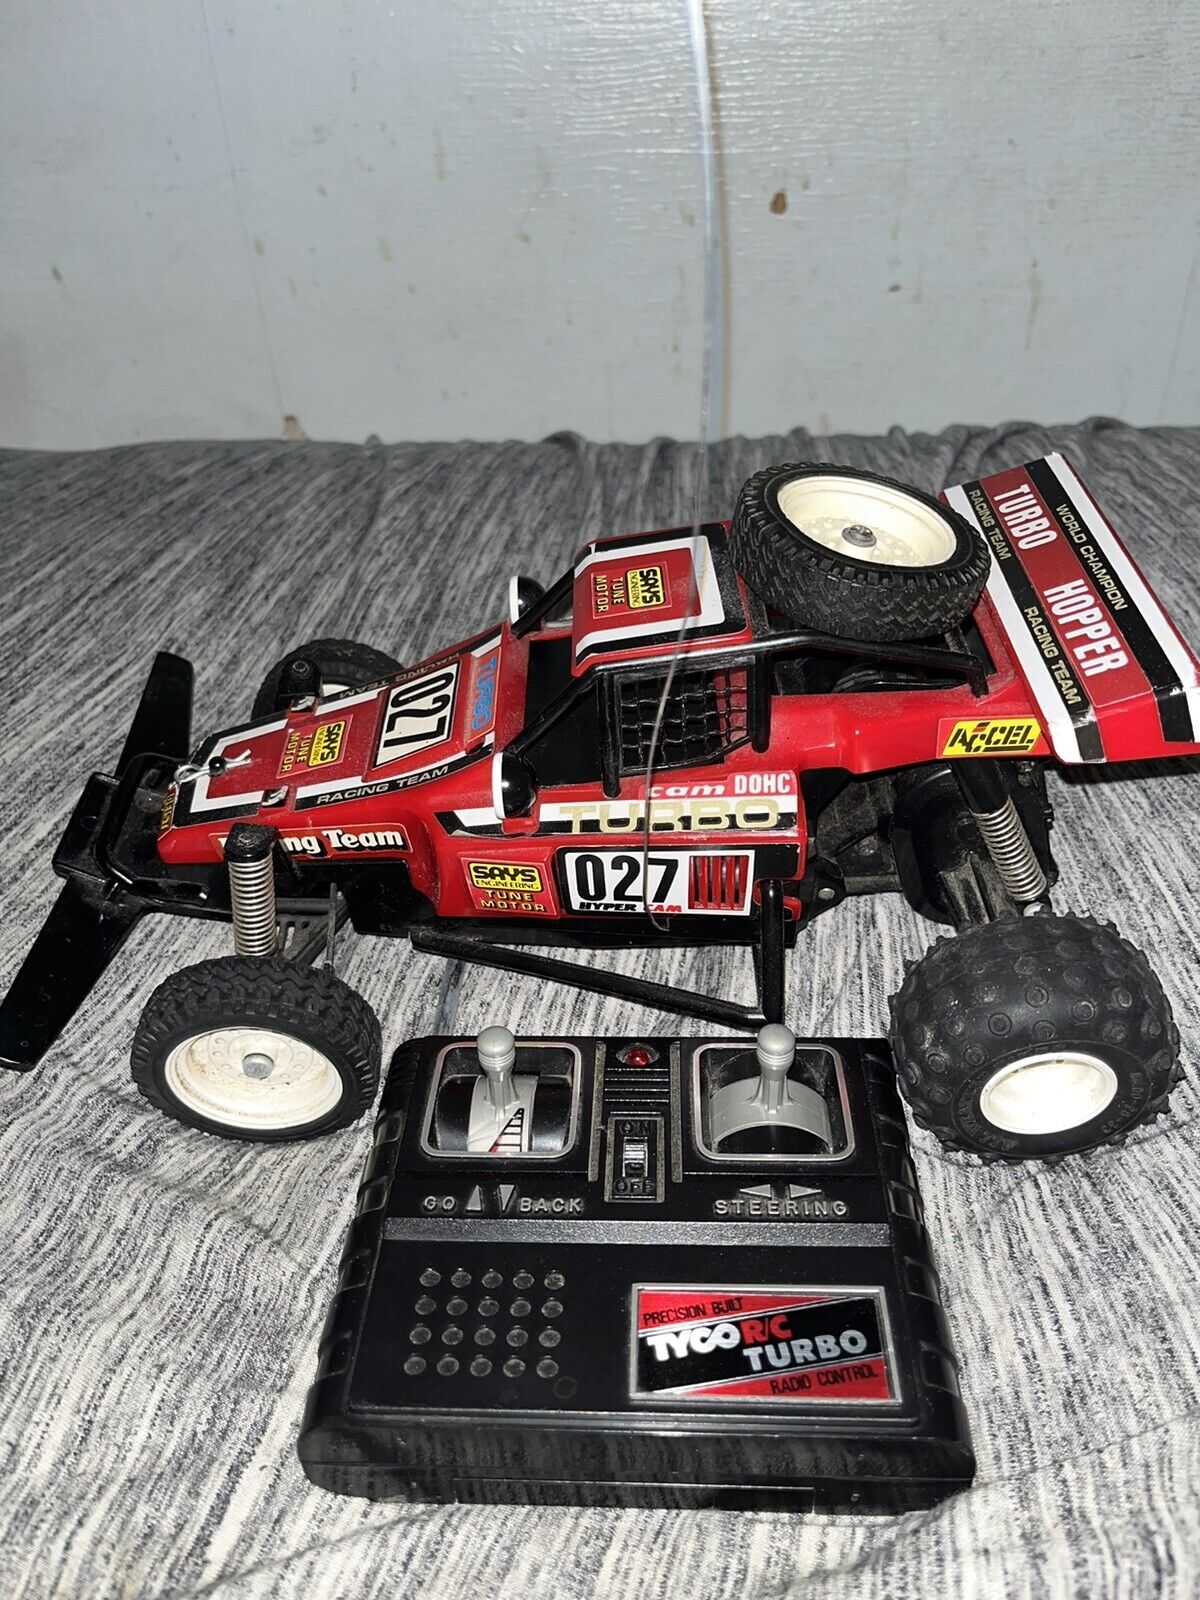 Vintage 1986 Tyco Turbo Hopper RC Dune Buggy 027 With Remote Tested and Works